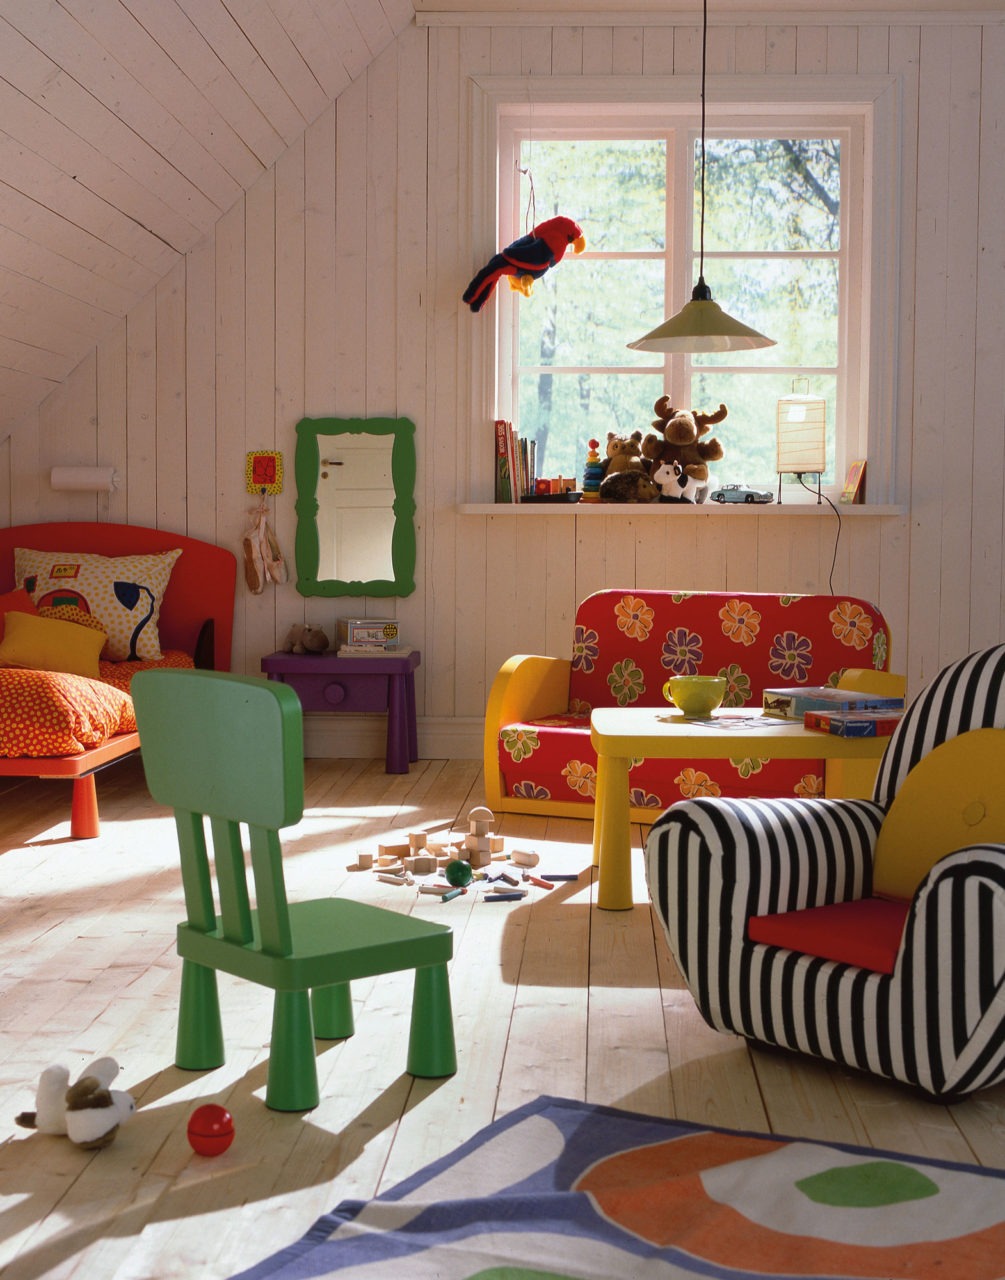 Colourful furniture in plump style, model MAMMUT, and scattered toys in a room with flooring, walls and angled ceiling in light wood.